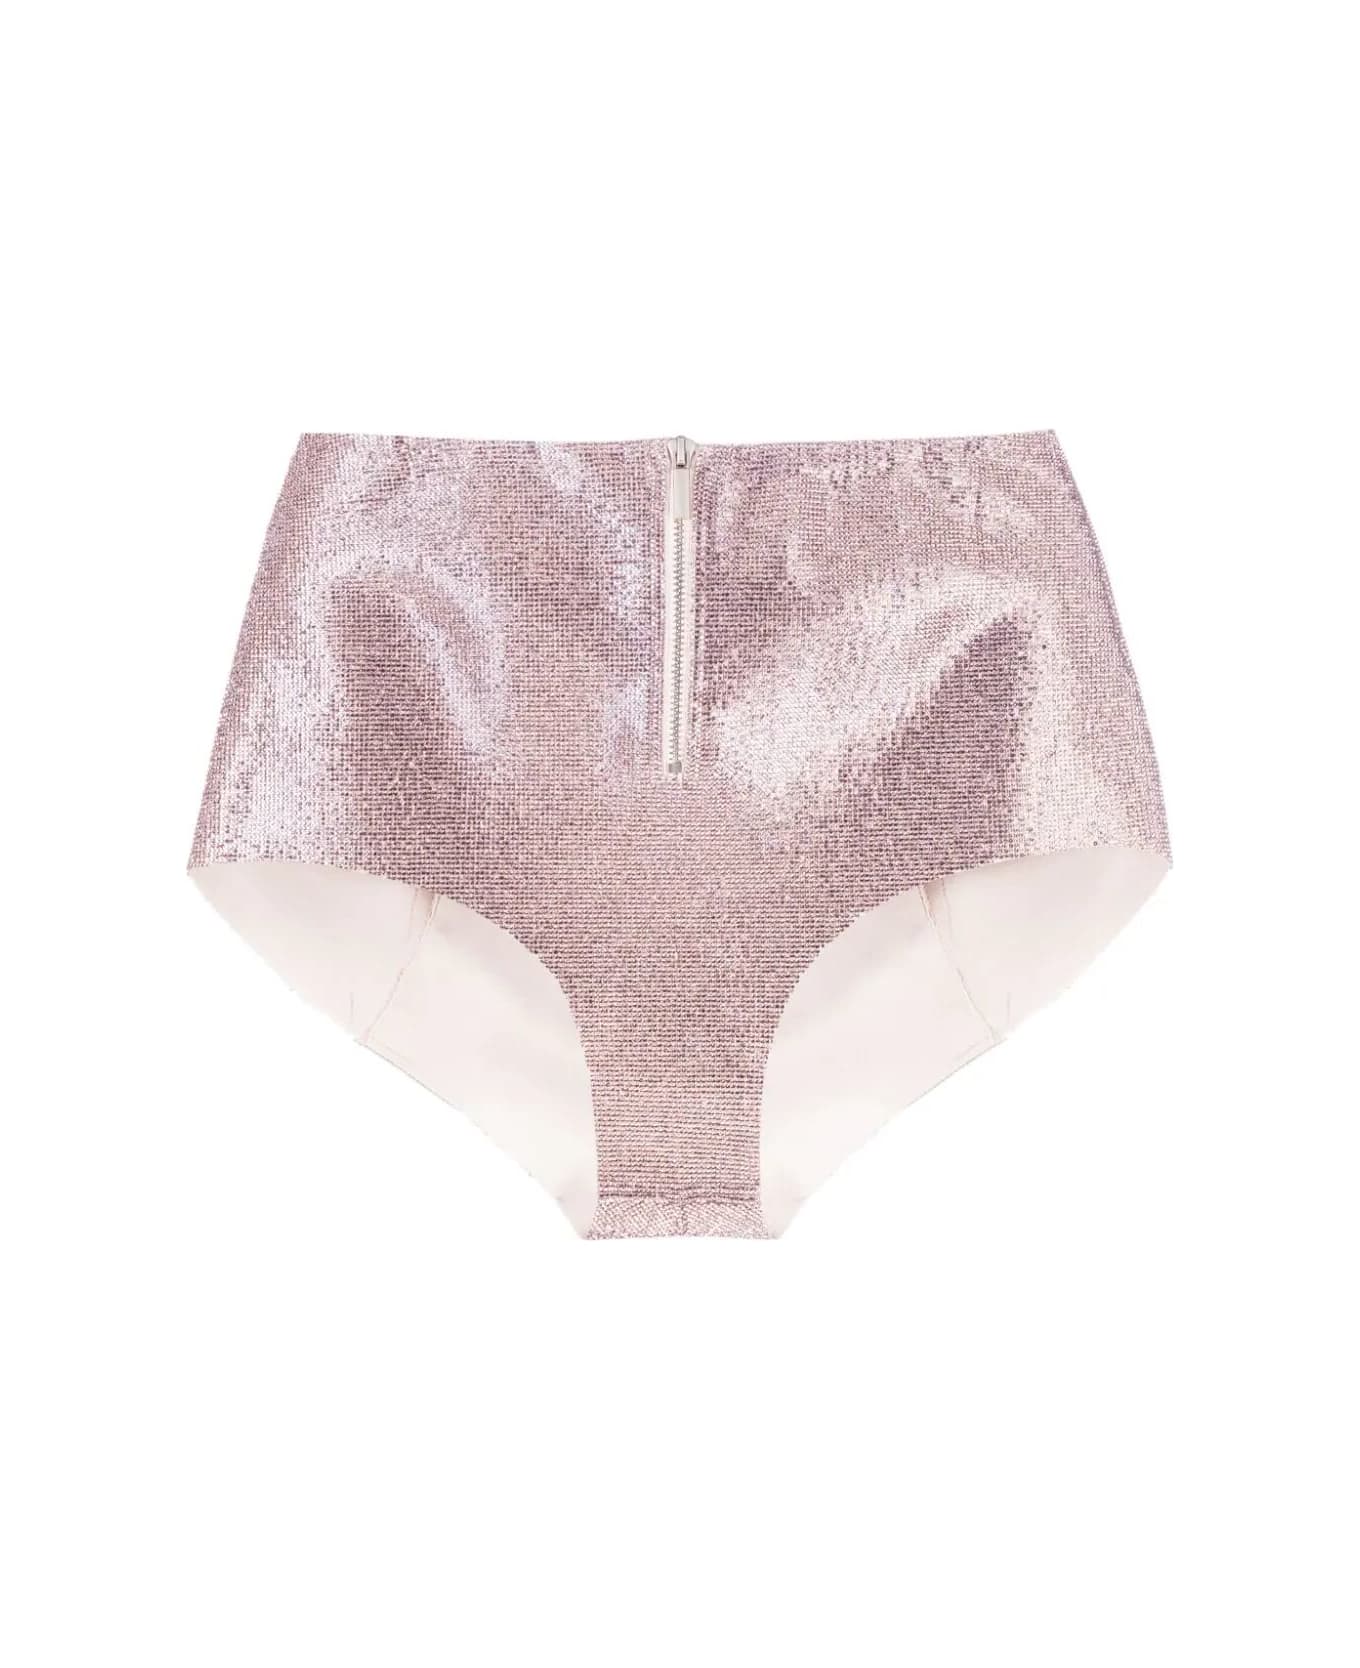 Drhope Crystal Culotte - Iridescent